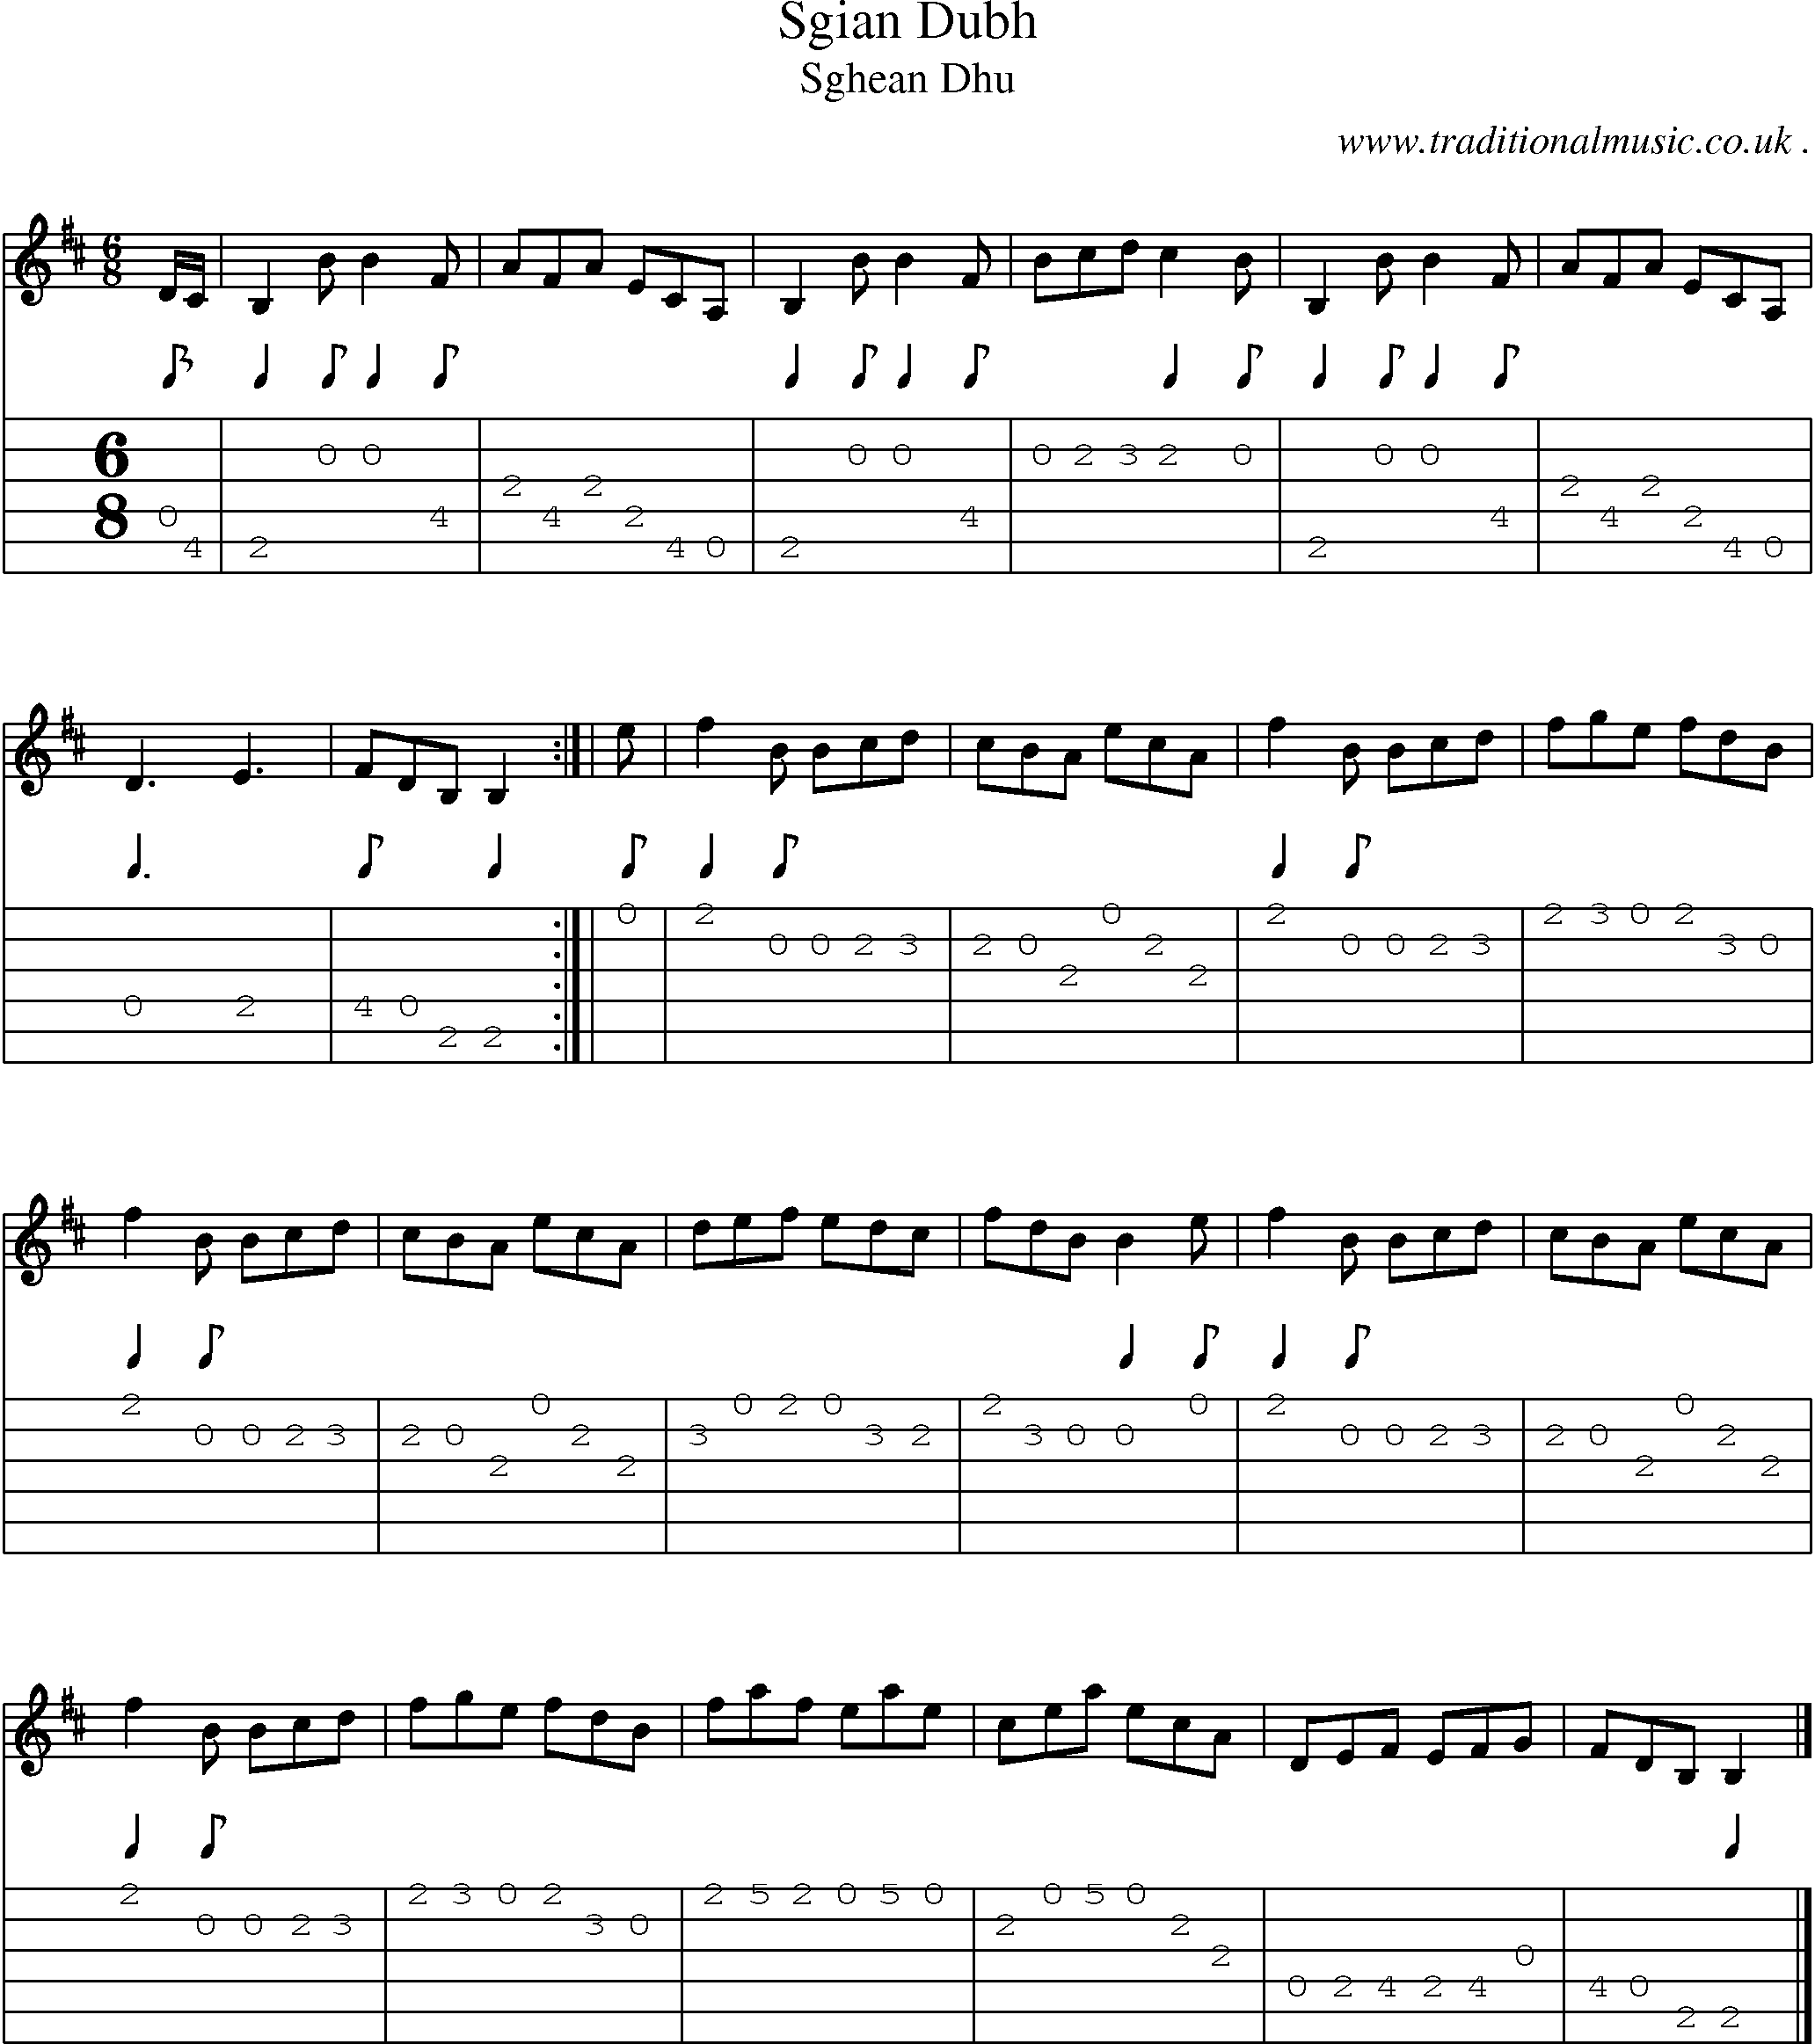 Sheet-music  score, Chords and Guitar Tabs for Sgian Dubh